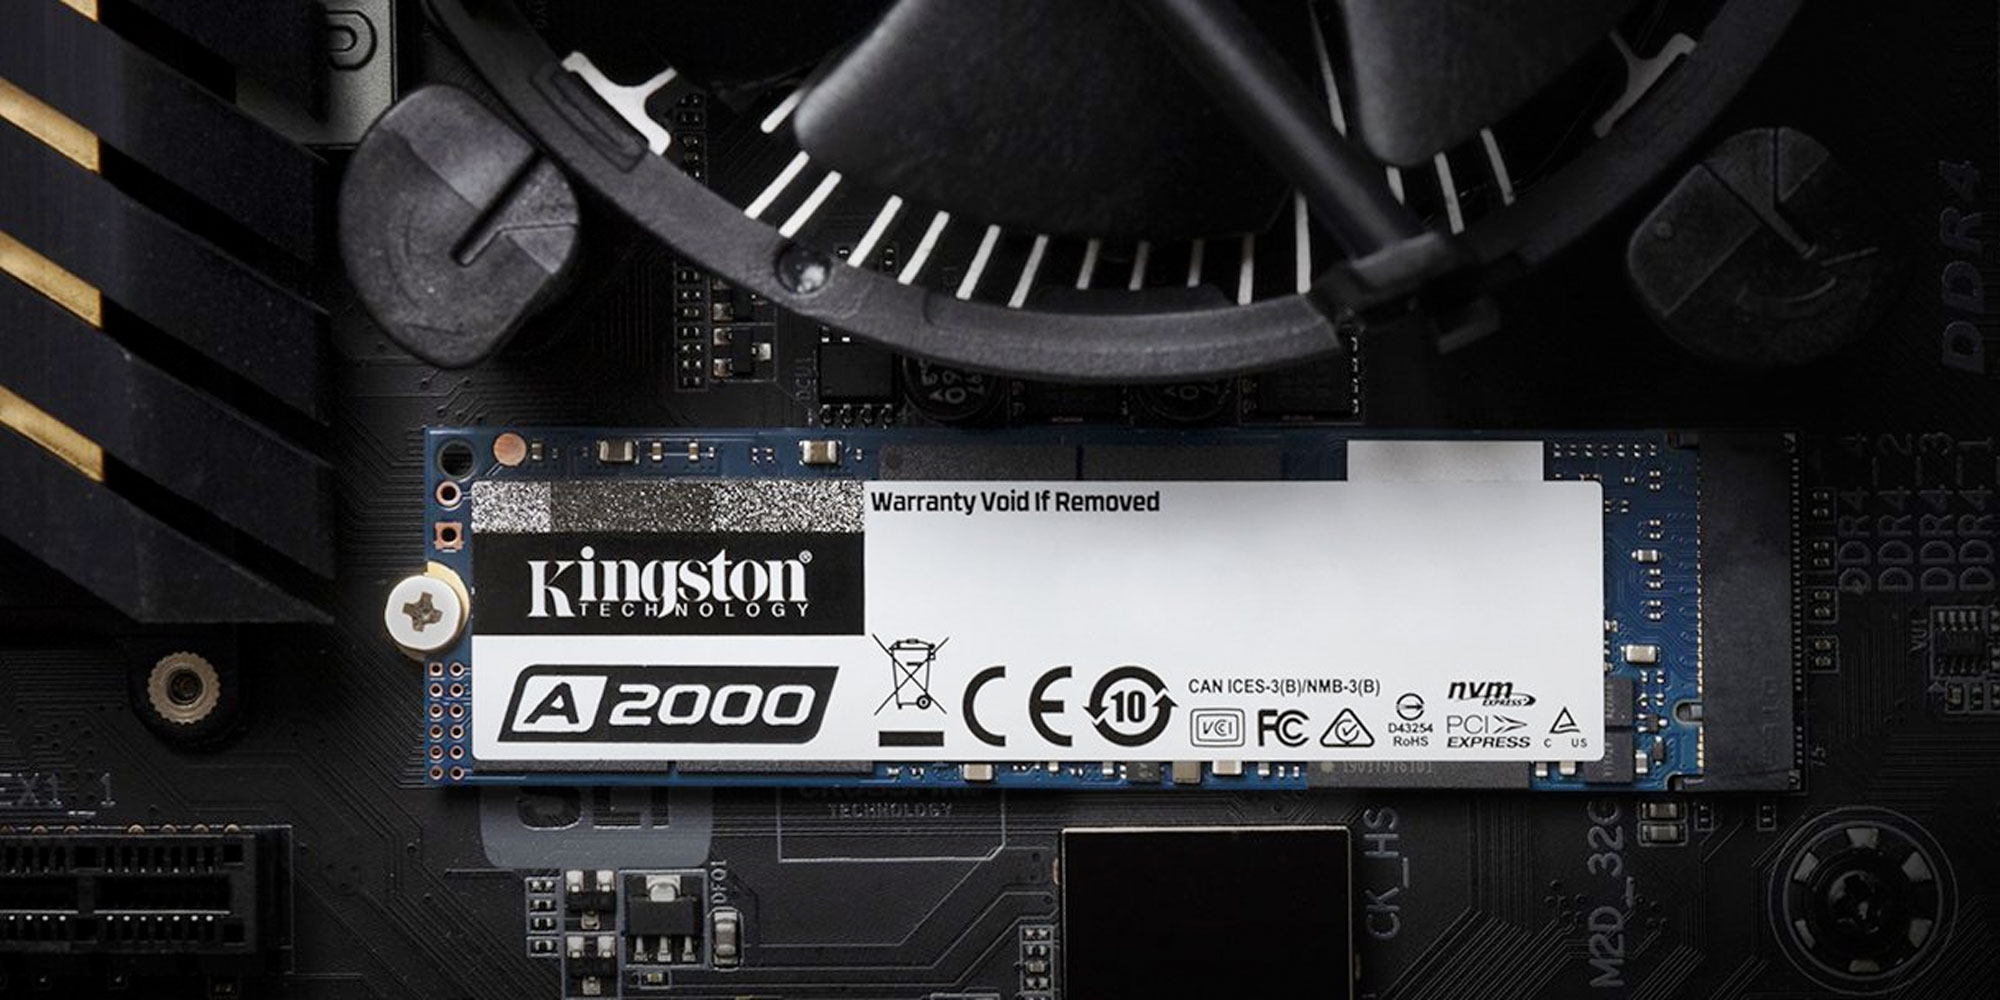 Manchuriet smugling Arkitektur Kingston's A2000 NVMe SSD offers 2.2GB/s speeds - 9to5Toys